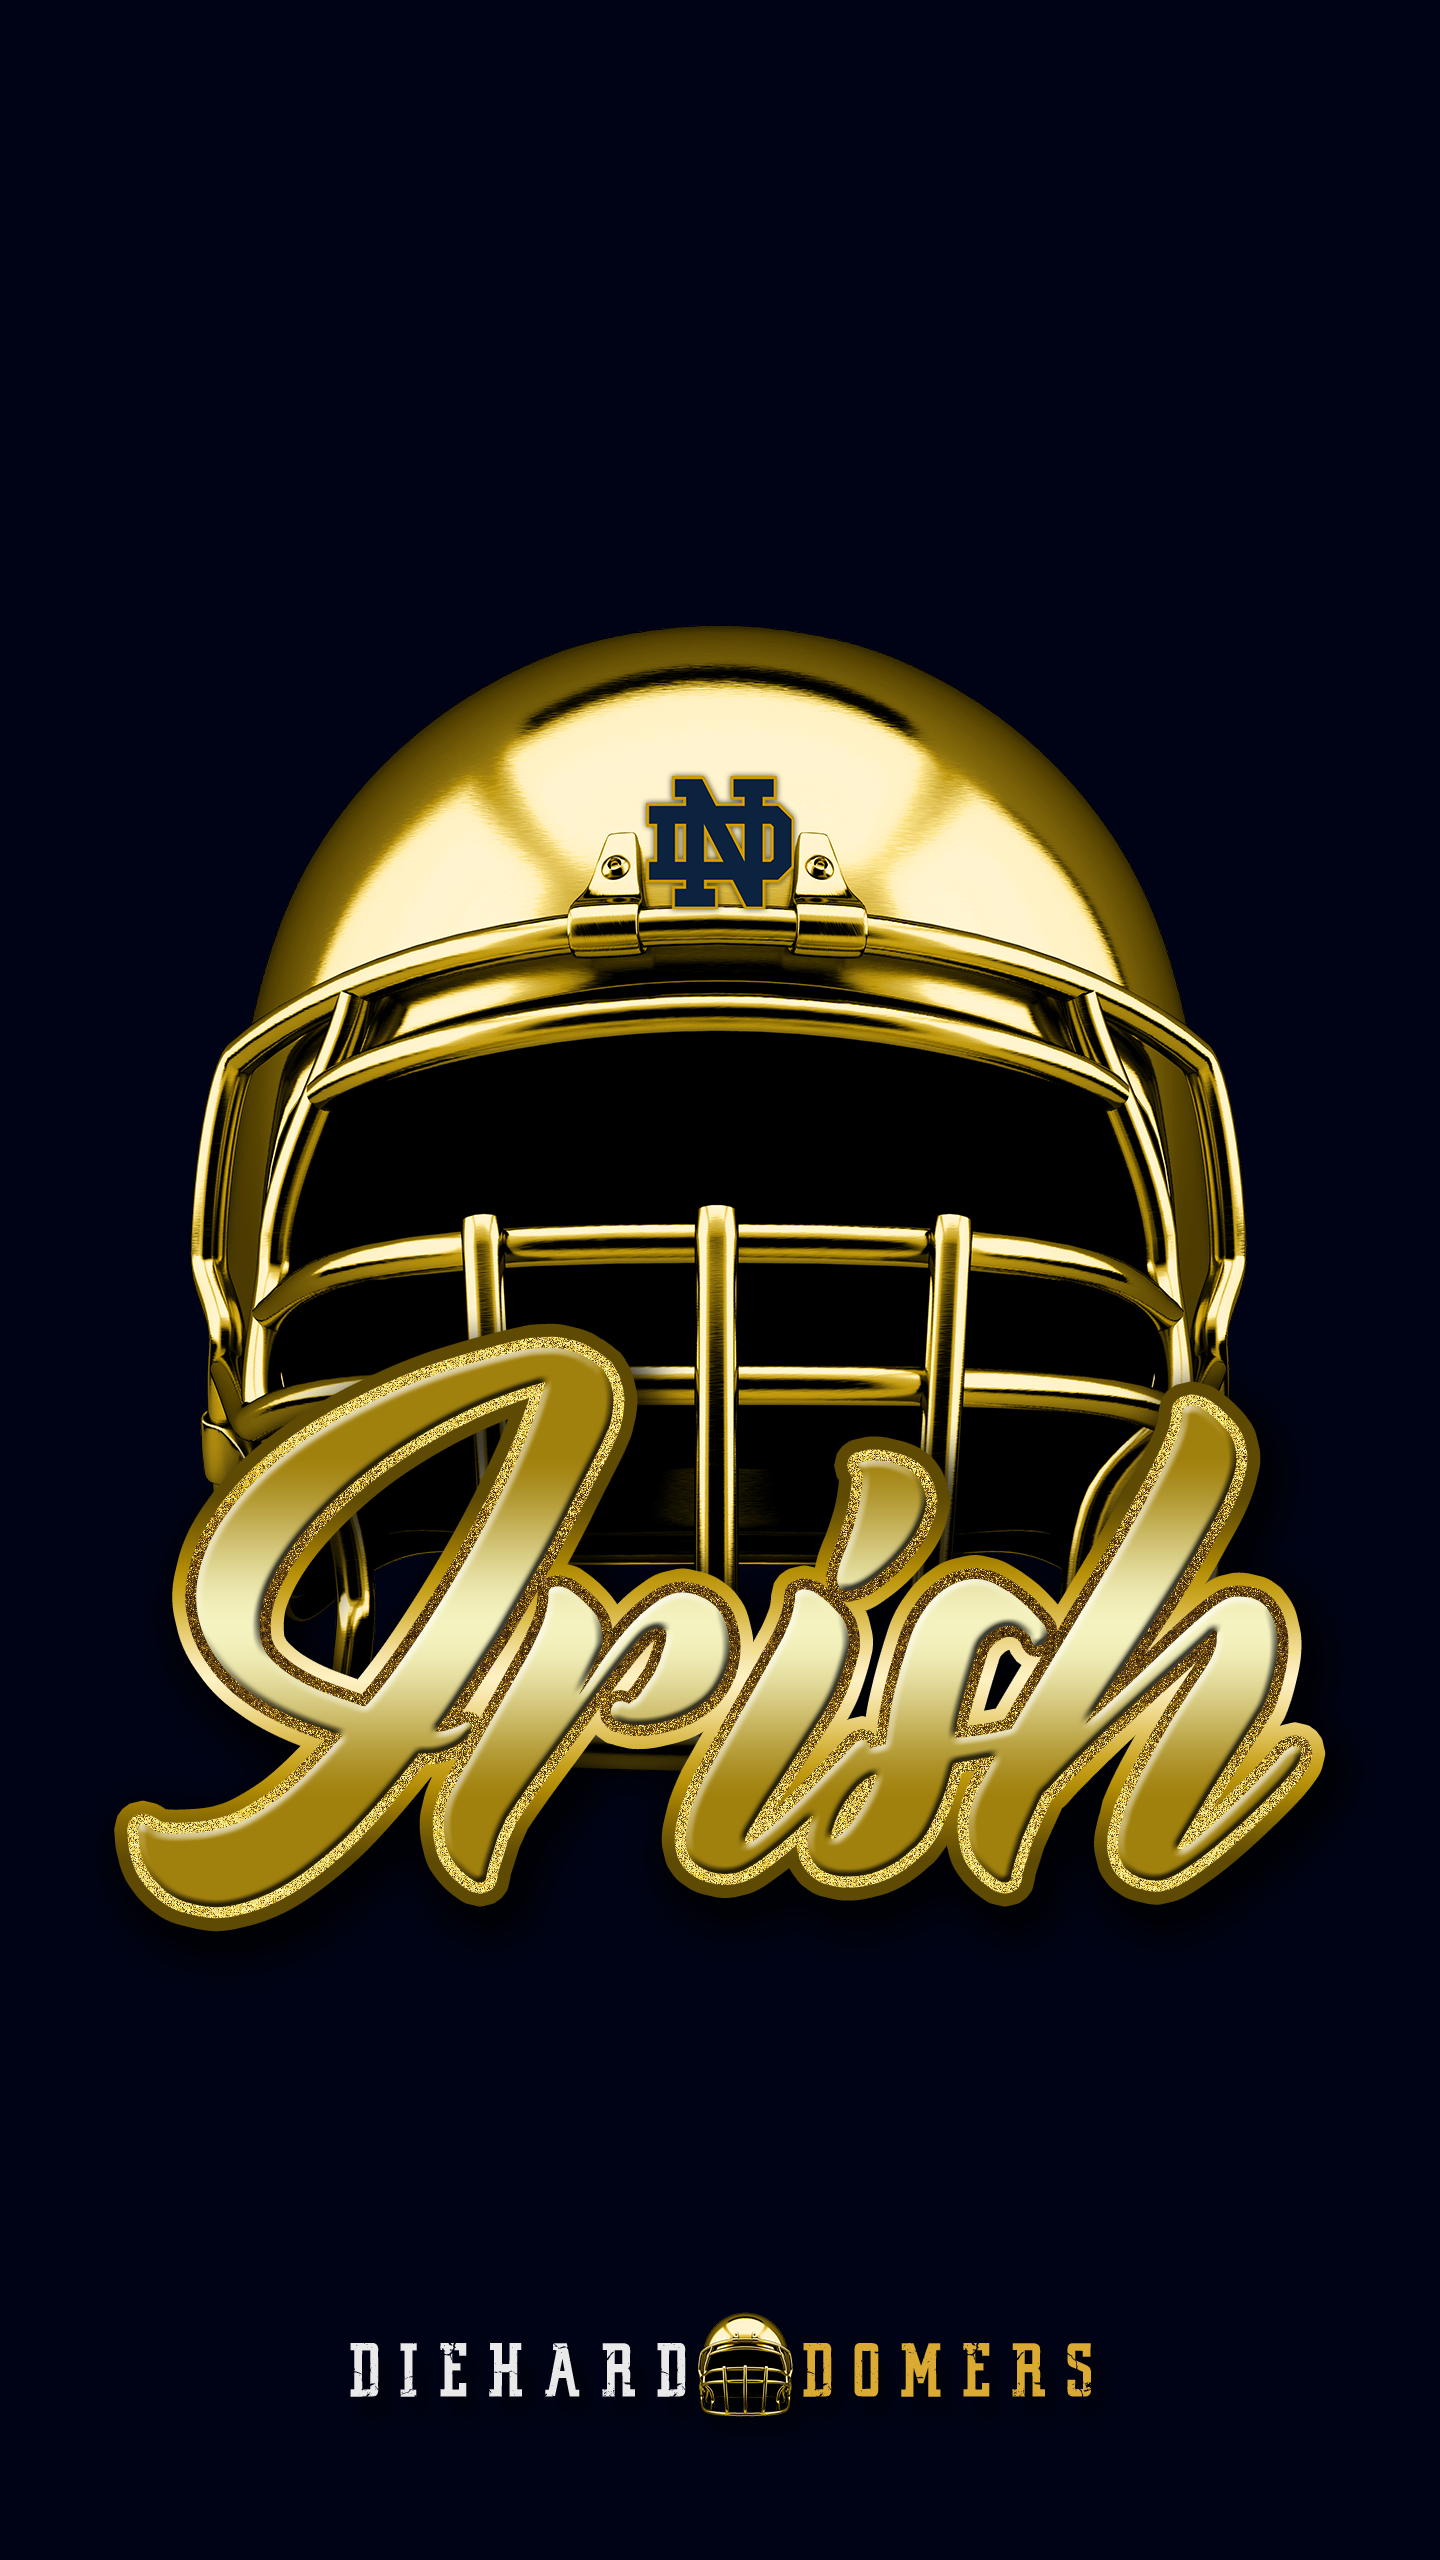 Notre Dame Football Wallpapers